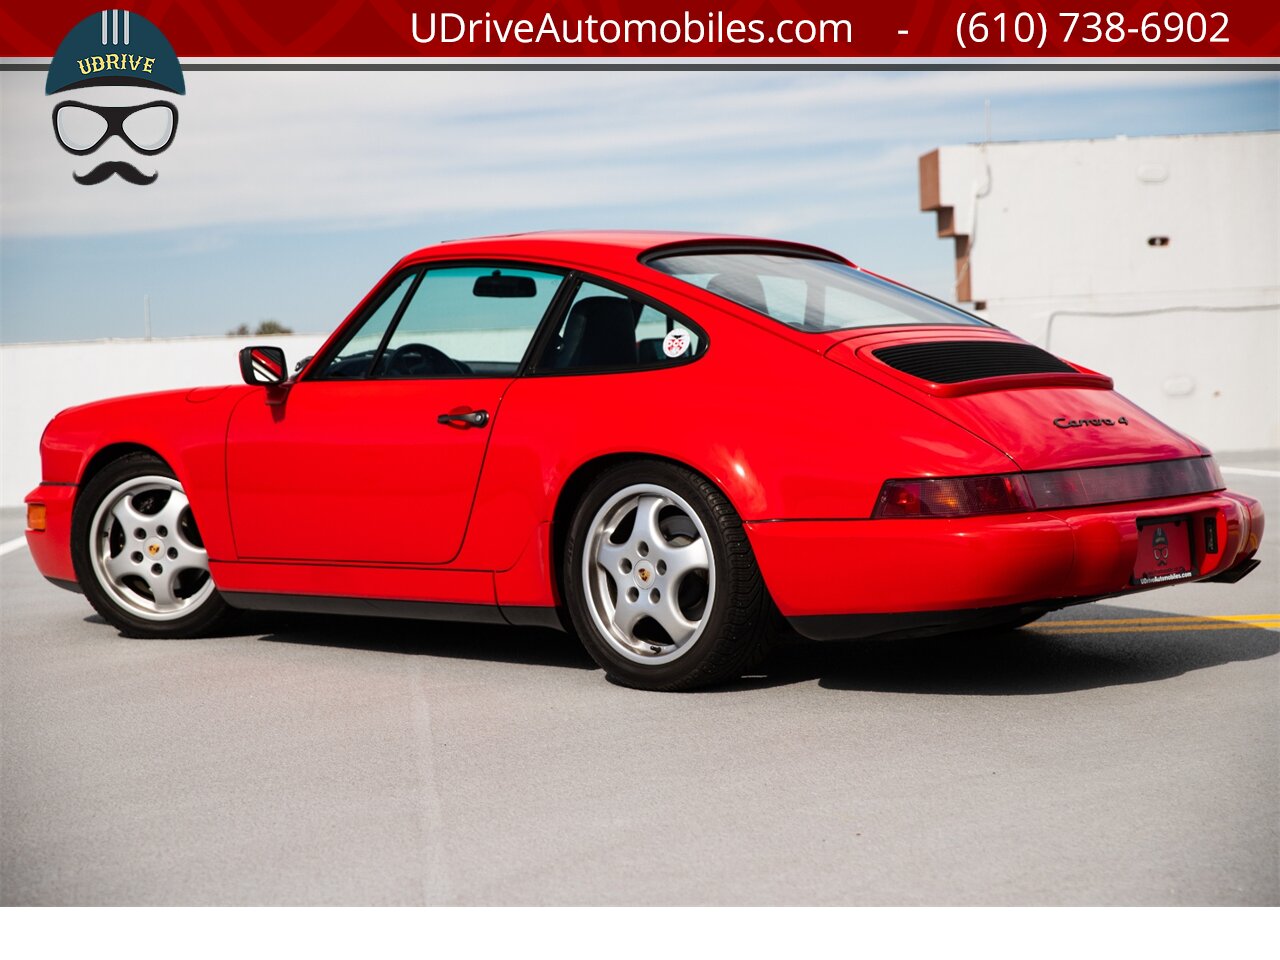 1989 Porsche 911 Carrera 4 964 C4 5 Speed Engine Rebuild  $40k in Service History Cup 1 Wheels - Photo 4 - West Chester, PA 19382